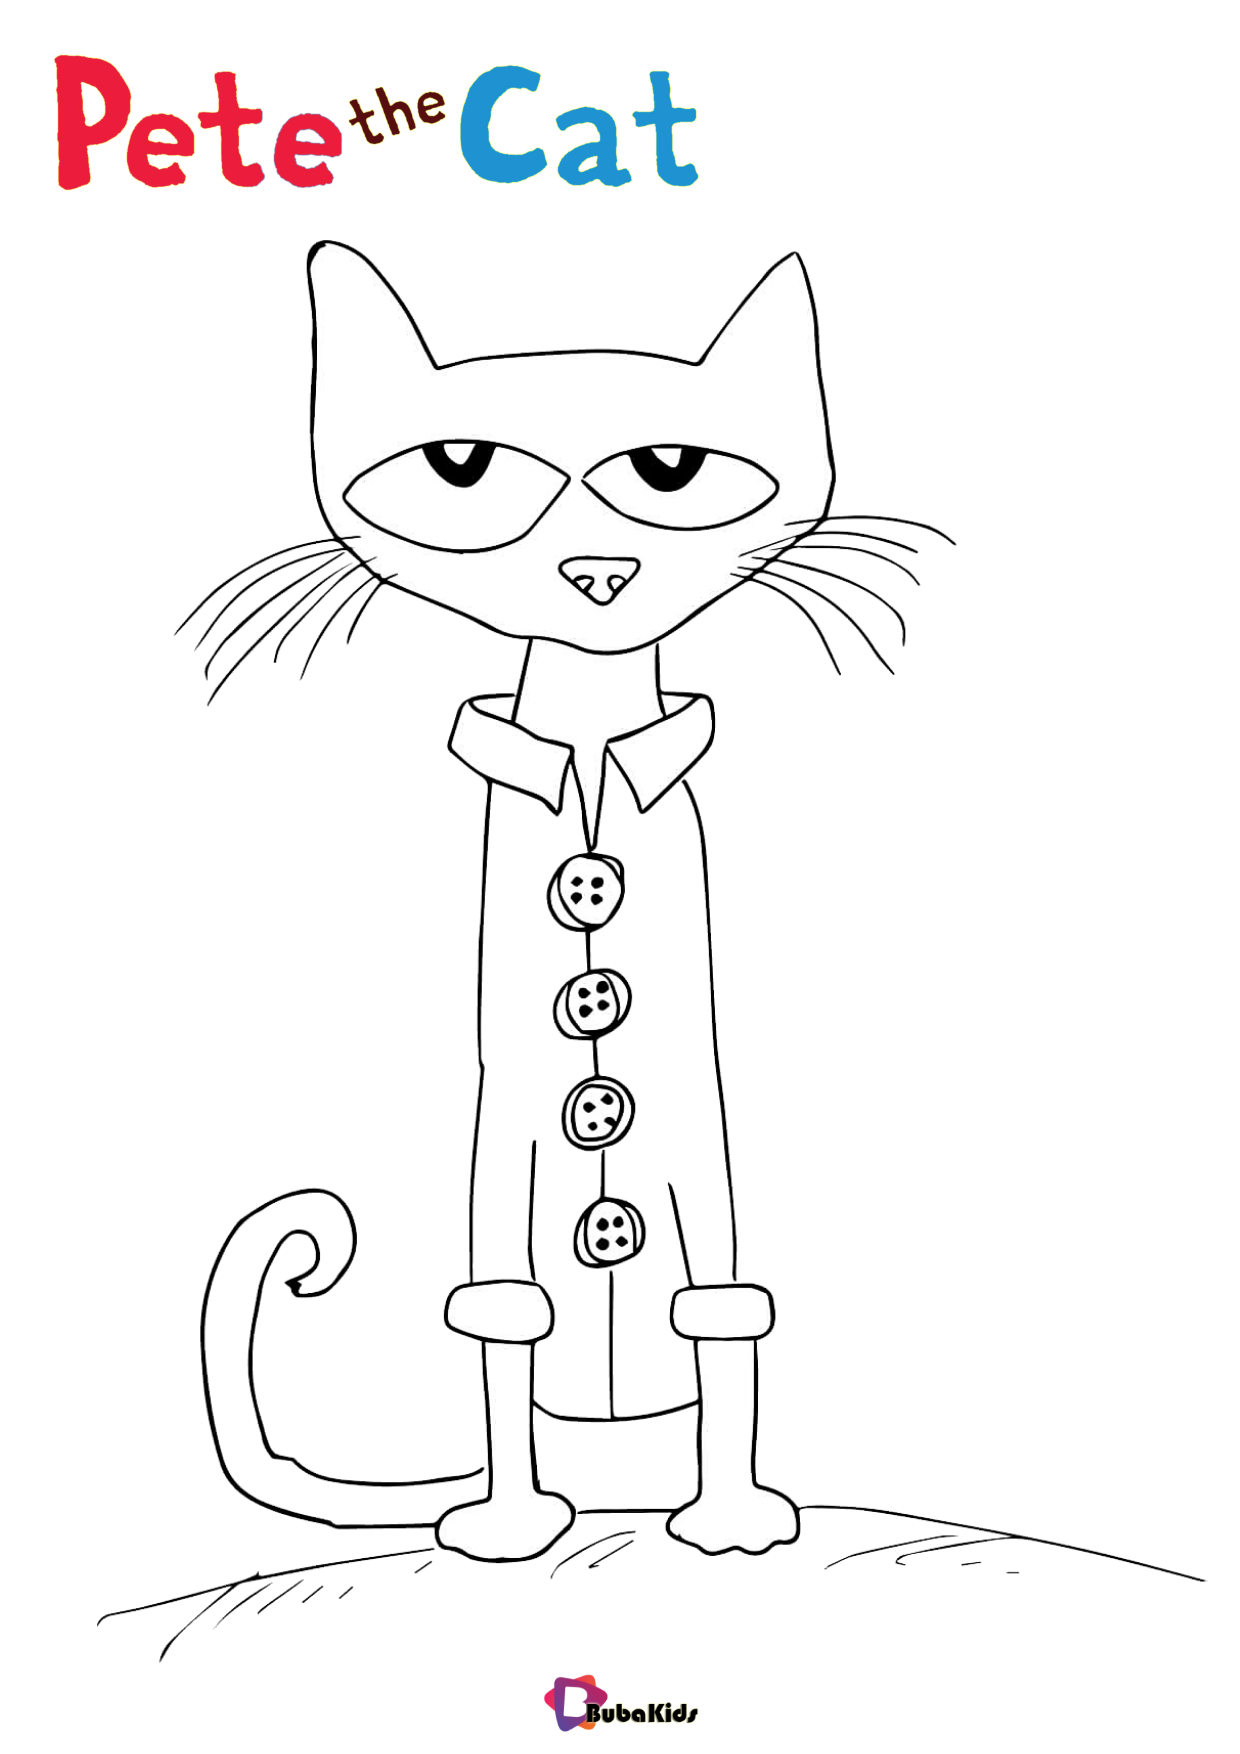 Pete the Cat Cartoon Cat coloring page